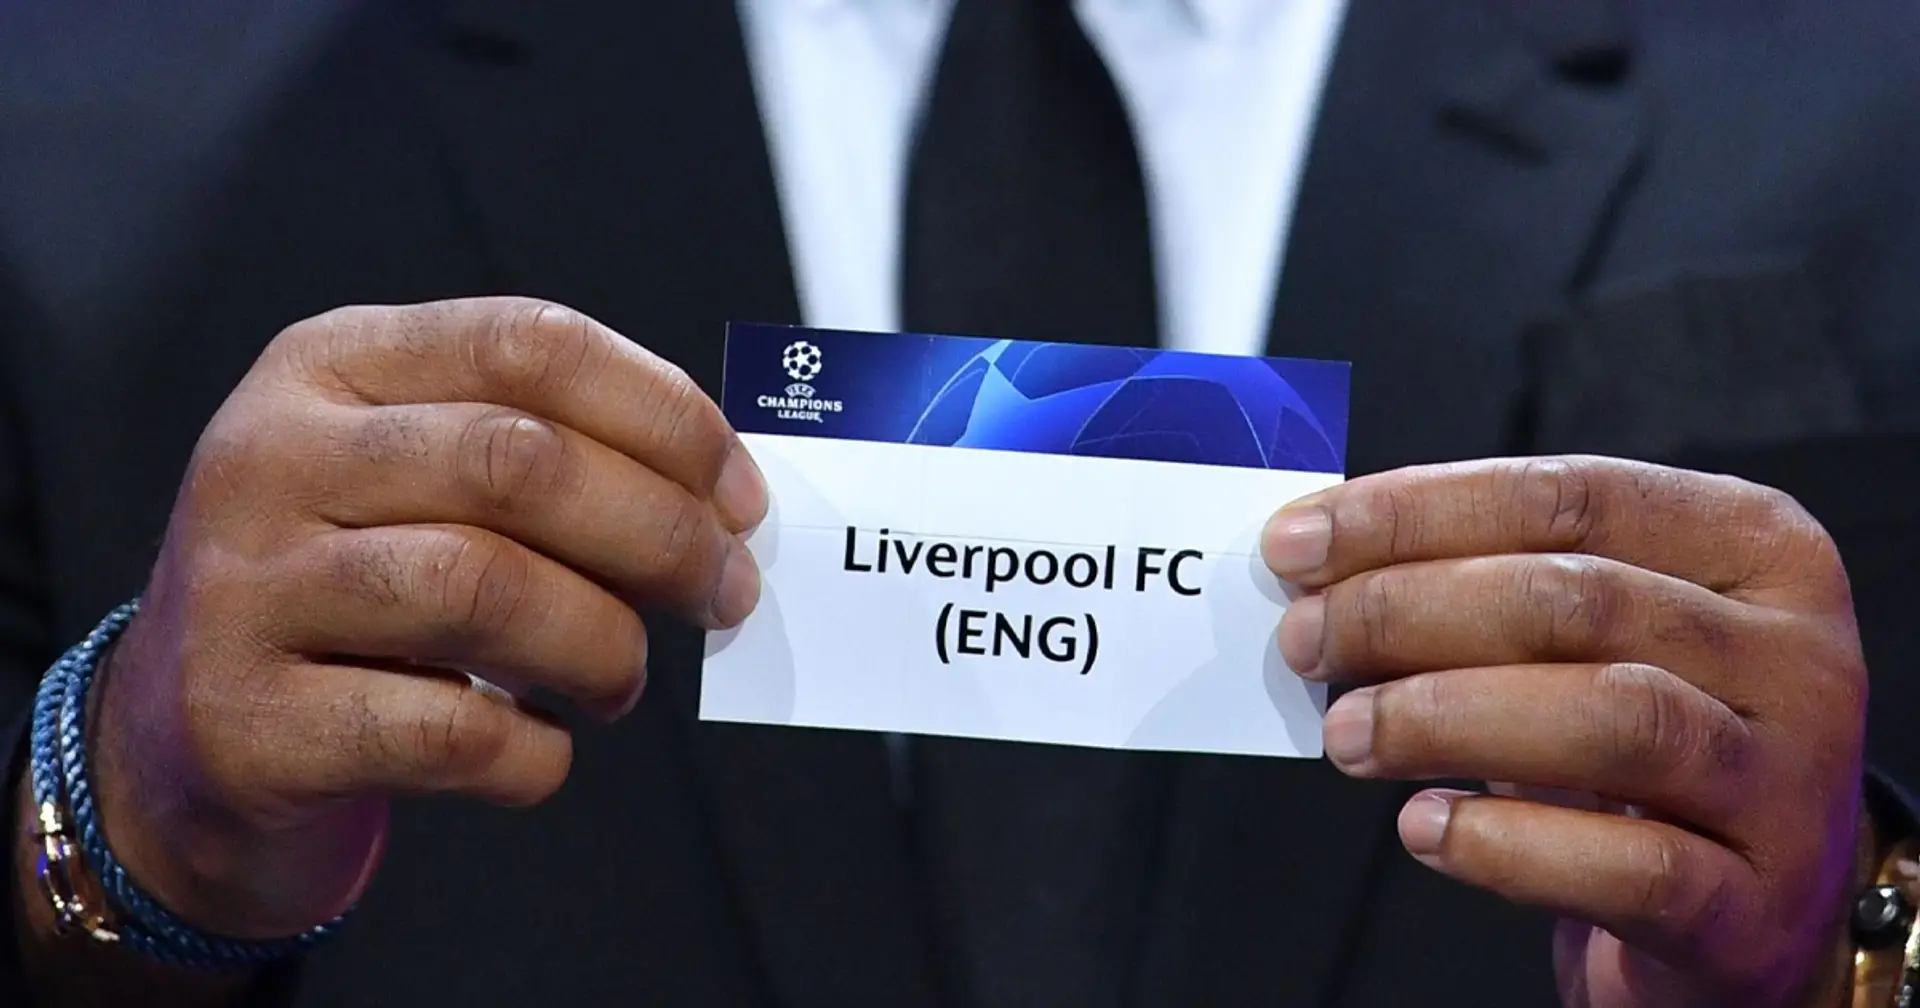 'Seems like a fun group', 'should breeze through': Global Reds community reacts to Champions League draw